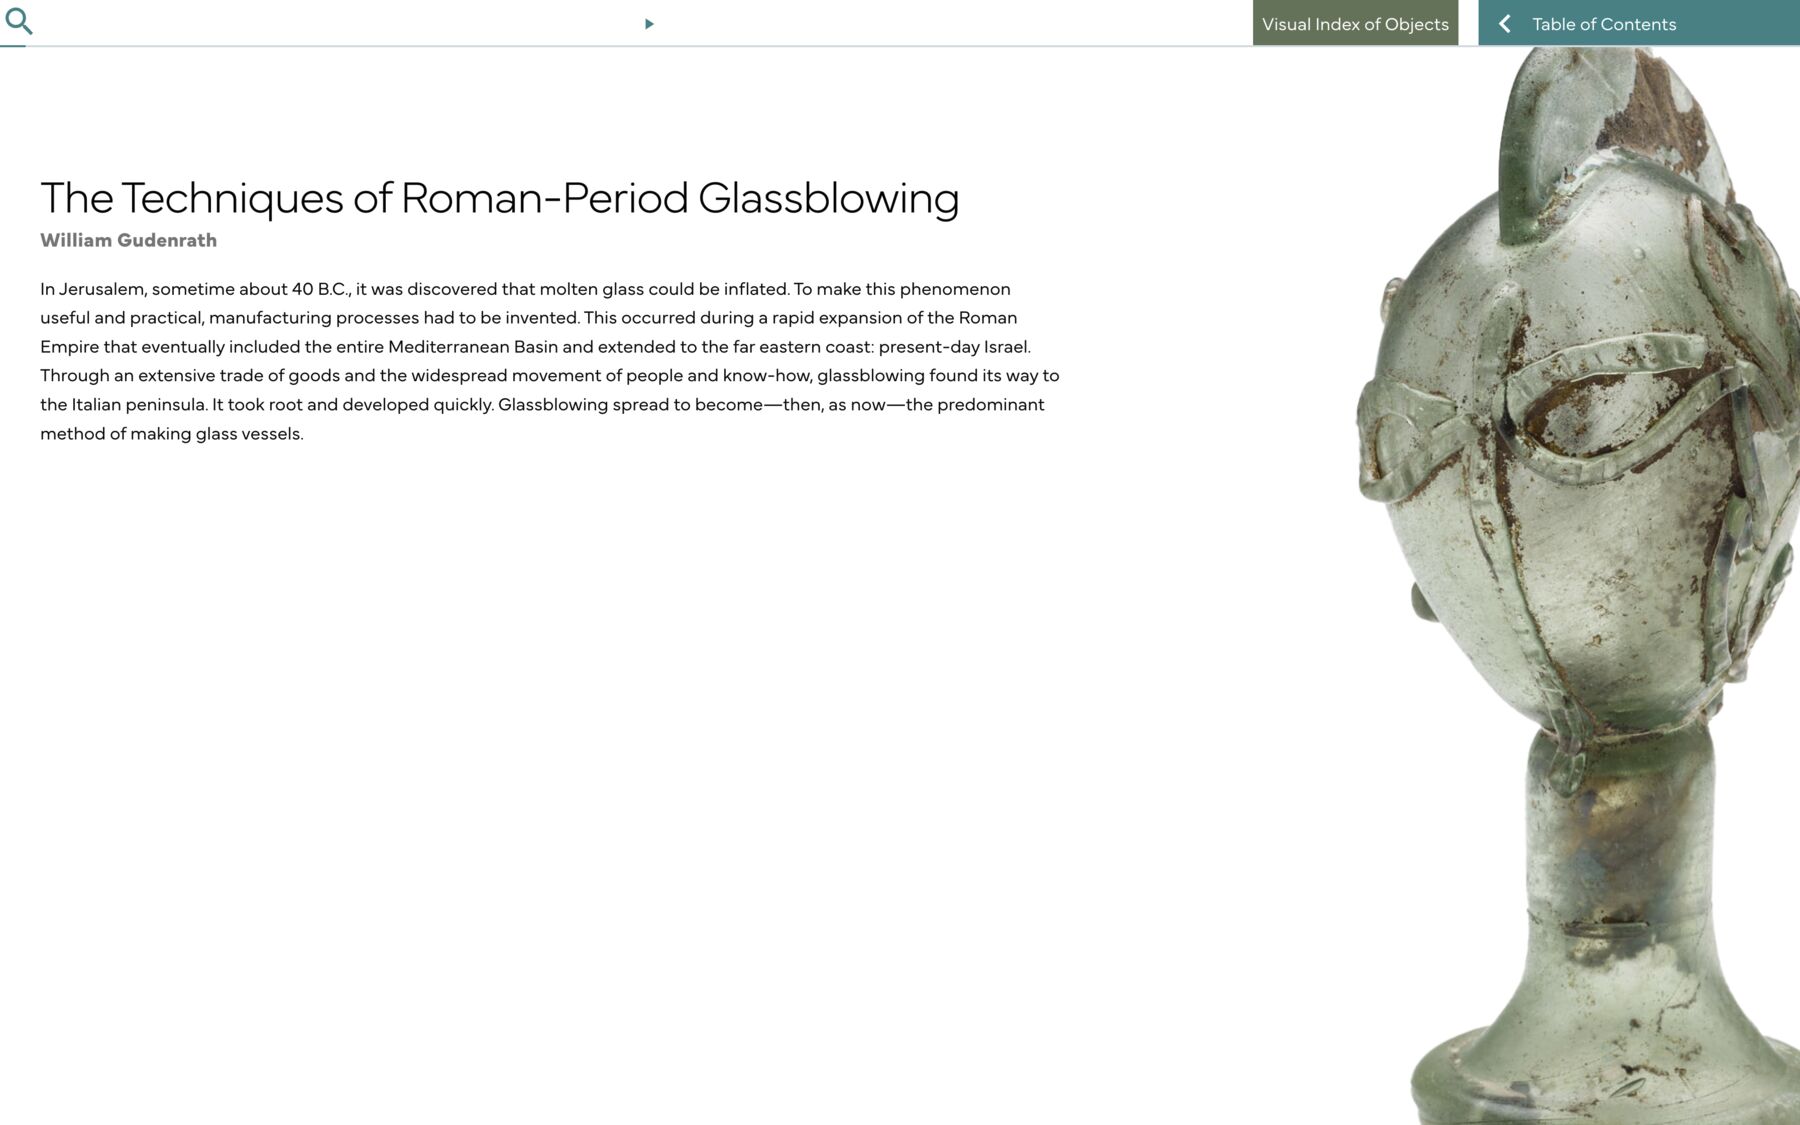 In addition to the title, *The Techniques of Roman-Period Glassblowing*, and author, William Gudenrath, the cover page also includes an image, navigation options, and introductory text.